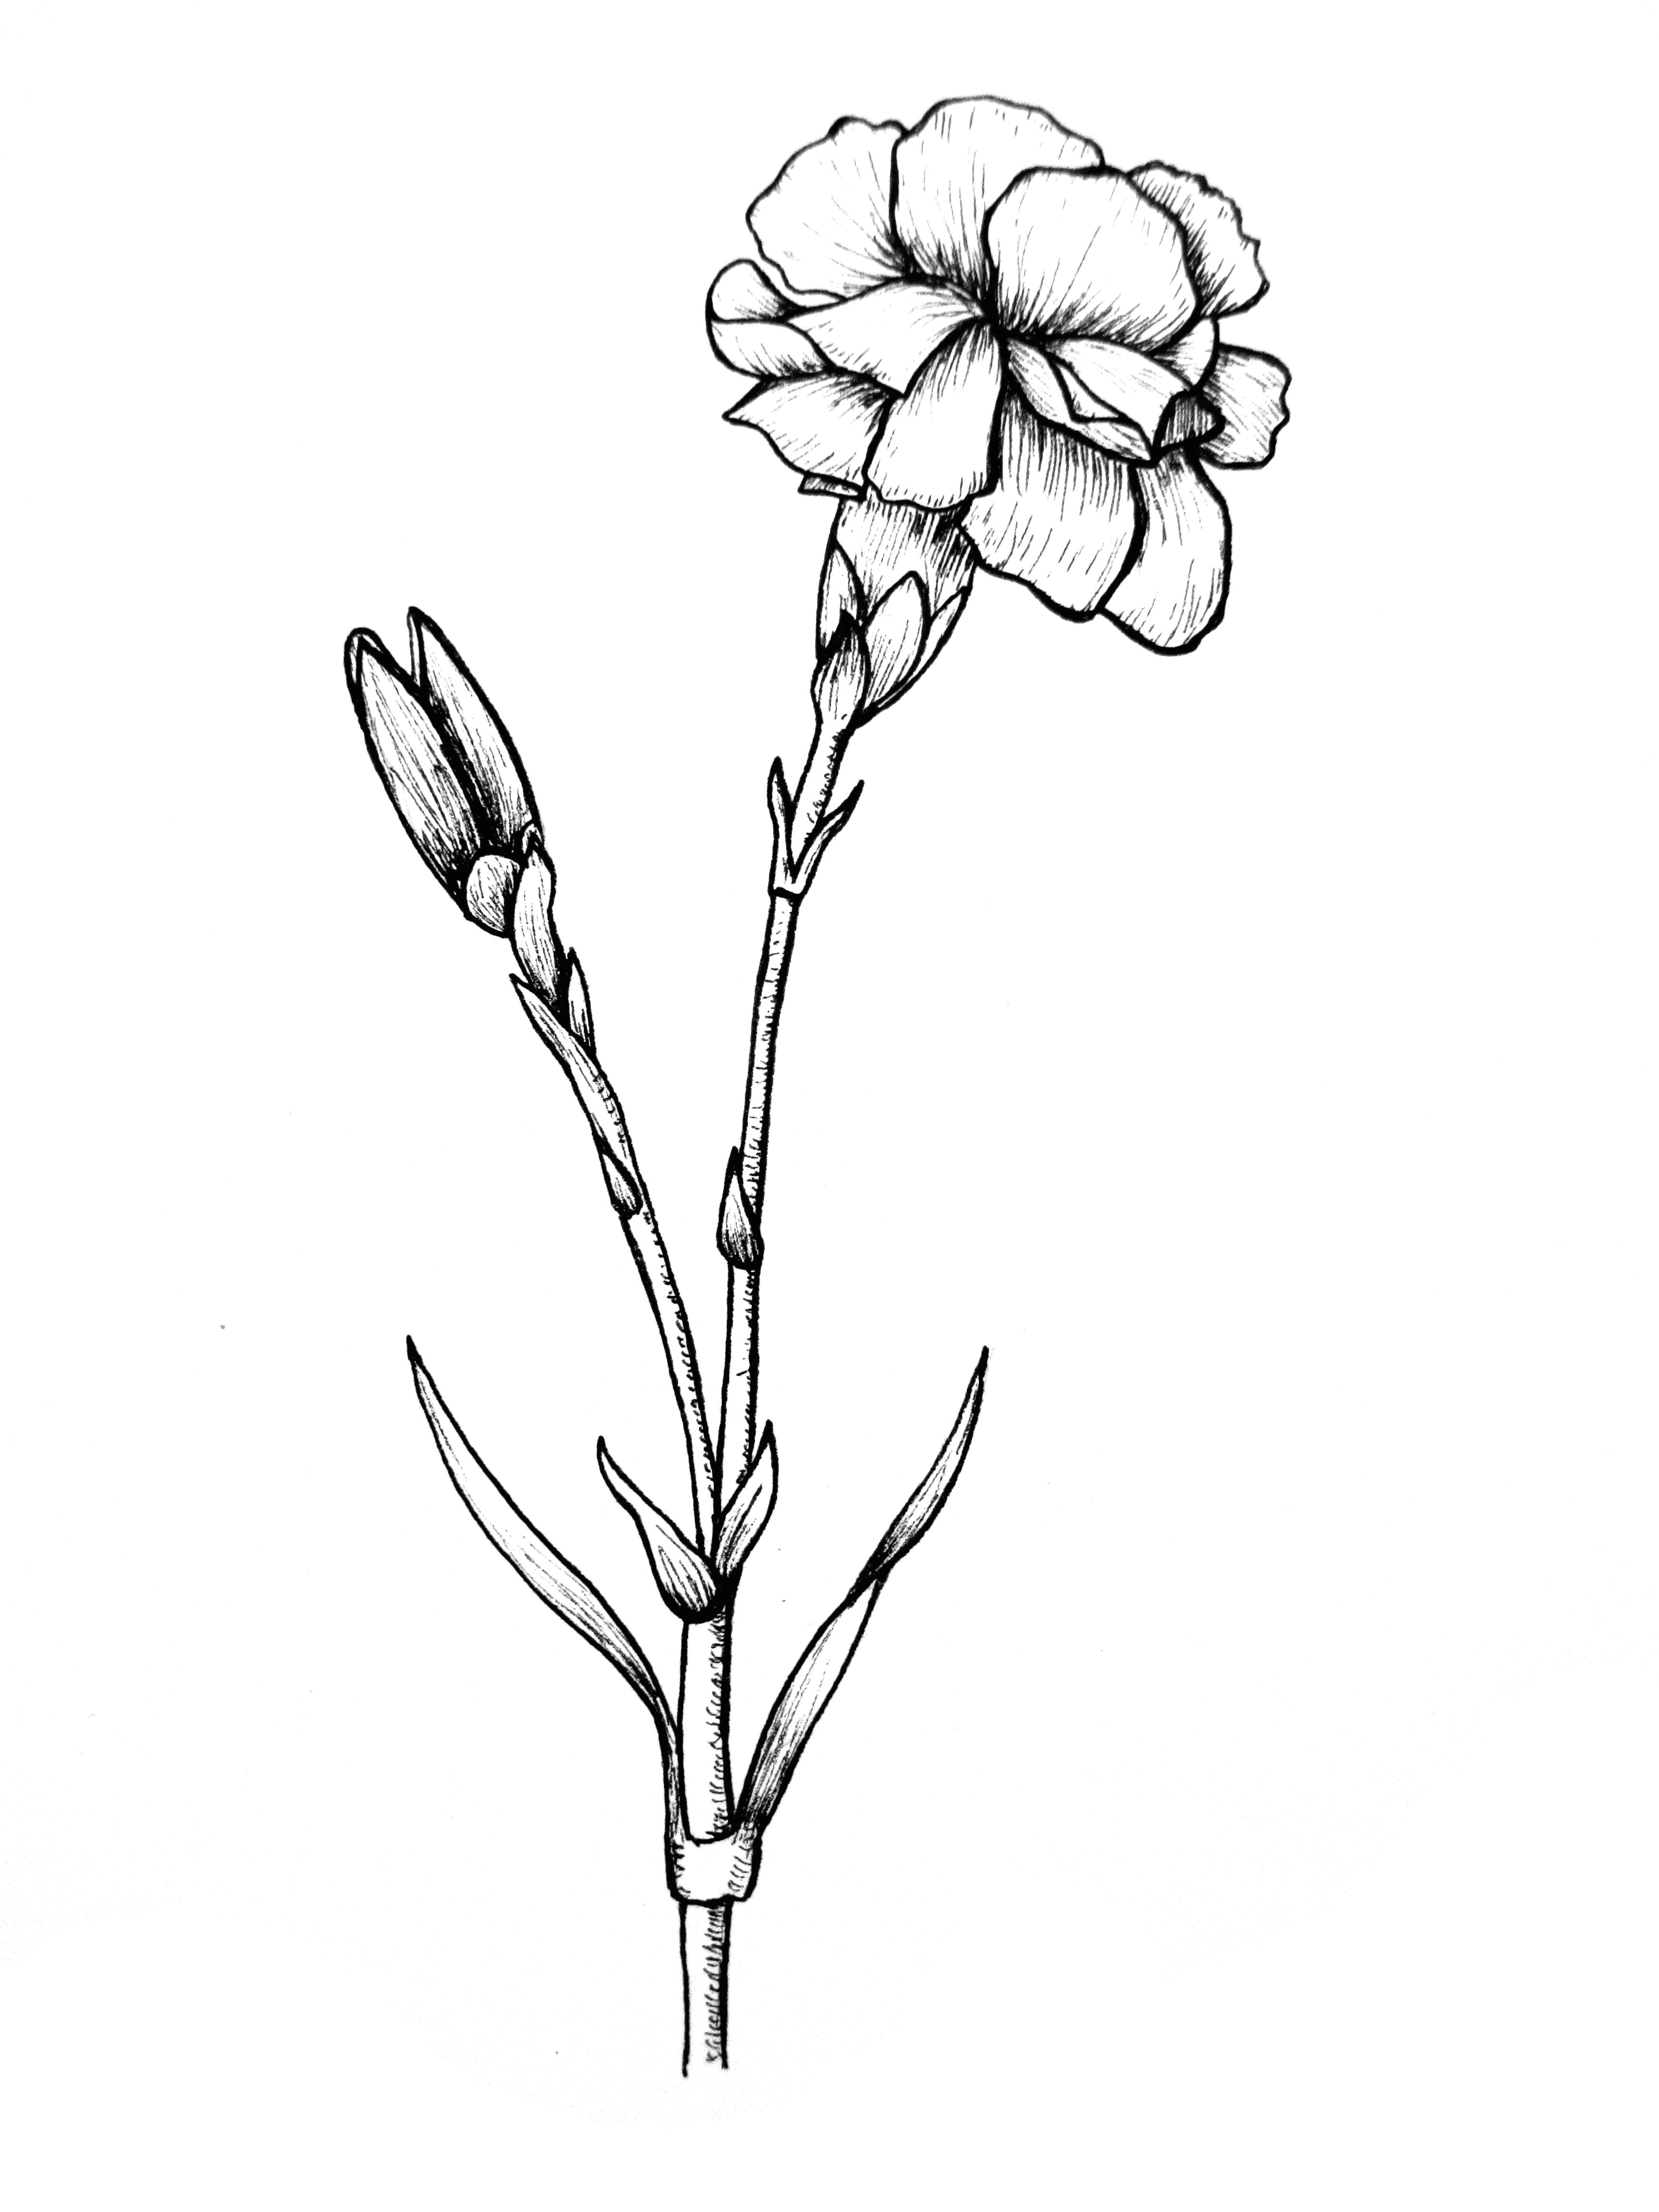 Drawings Of Flowers On Vines Awesome Pencil Drawings Of Flowers and Vines Www Pantry Magic Com